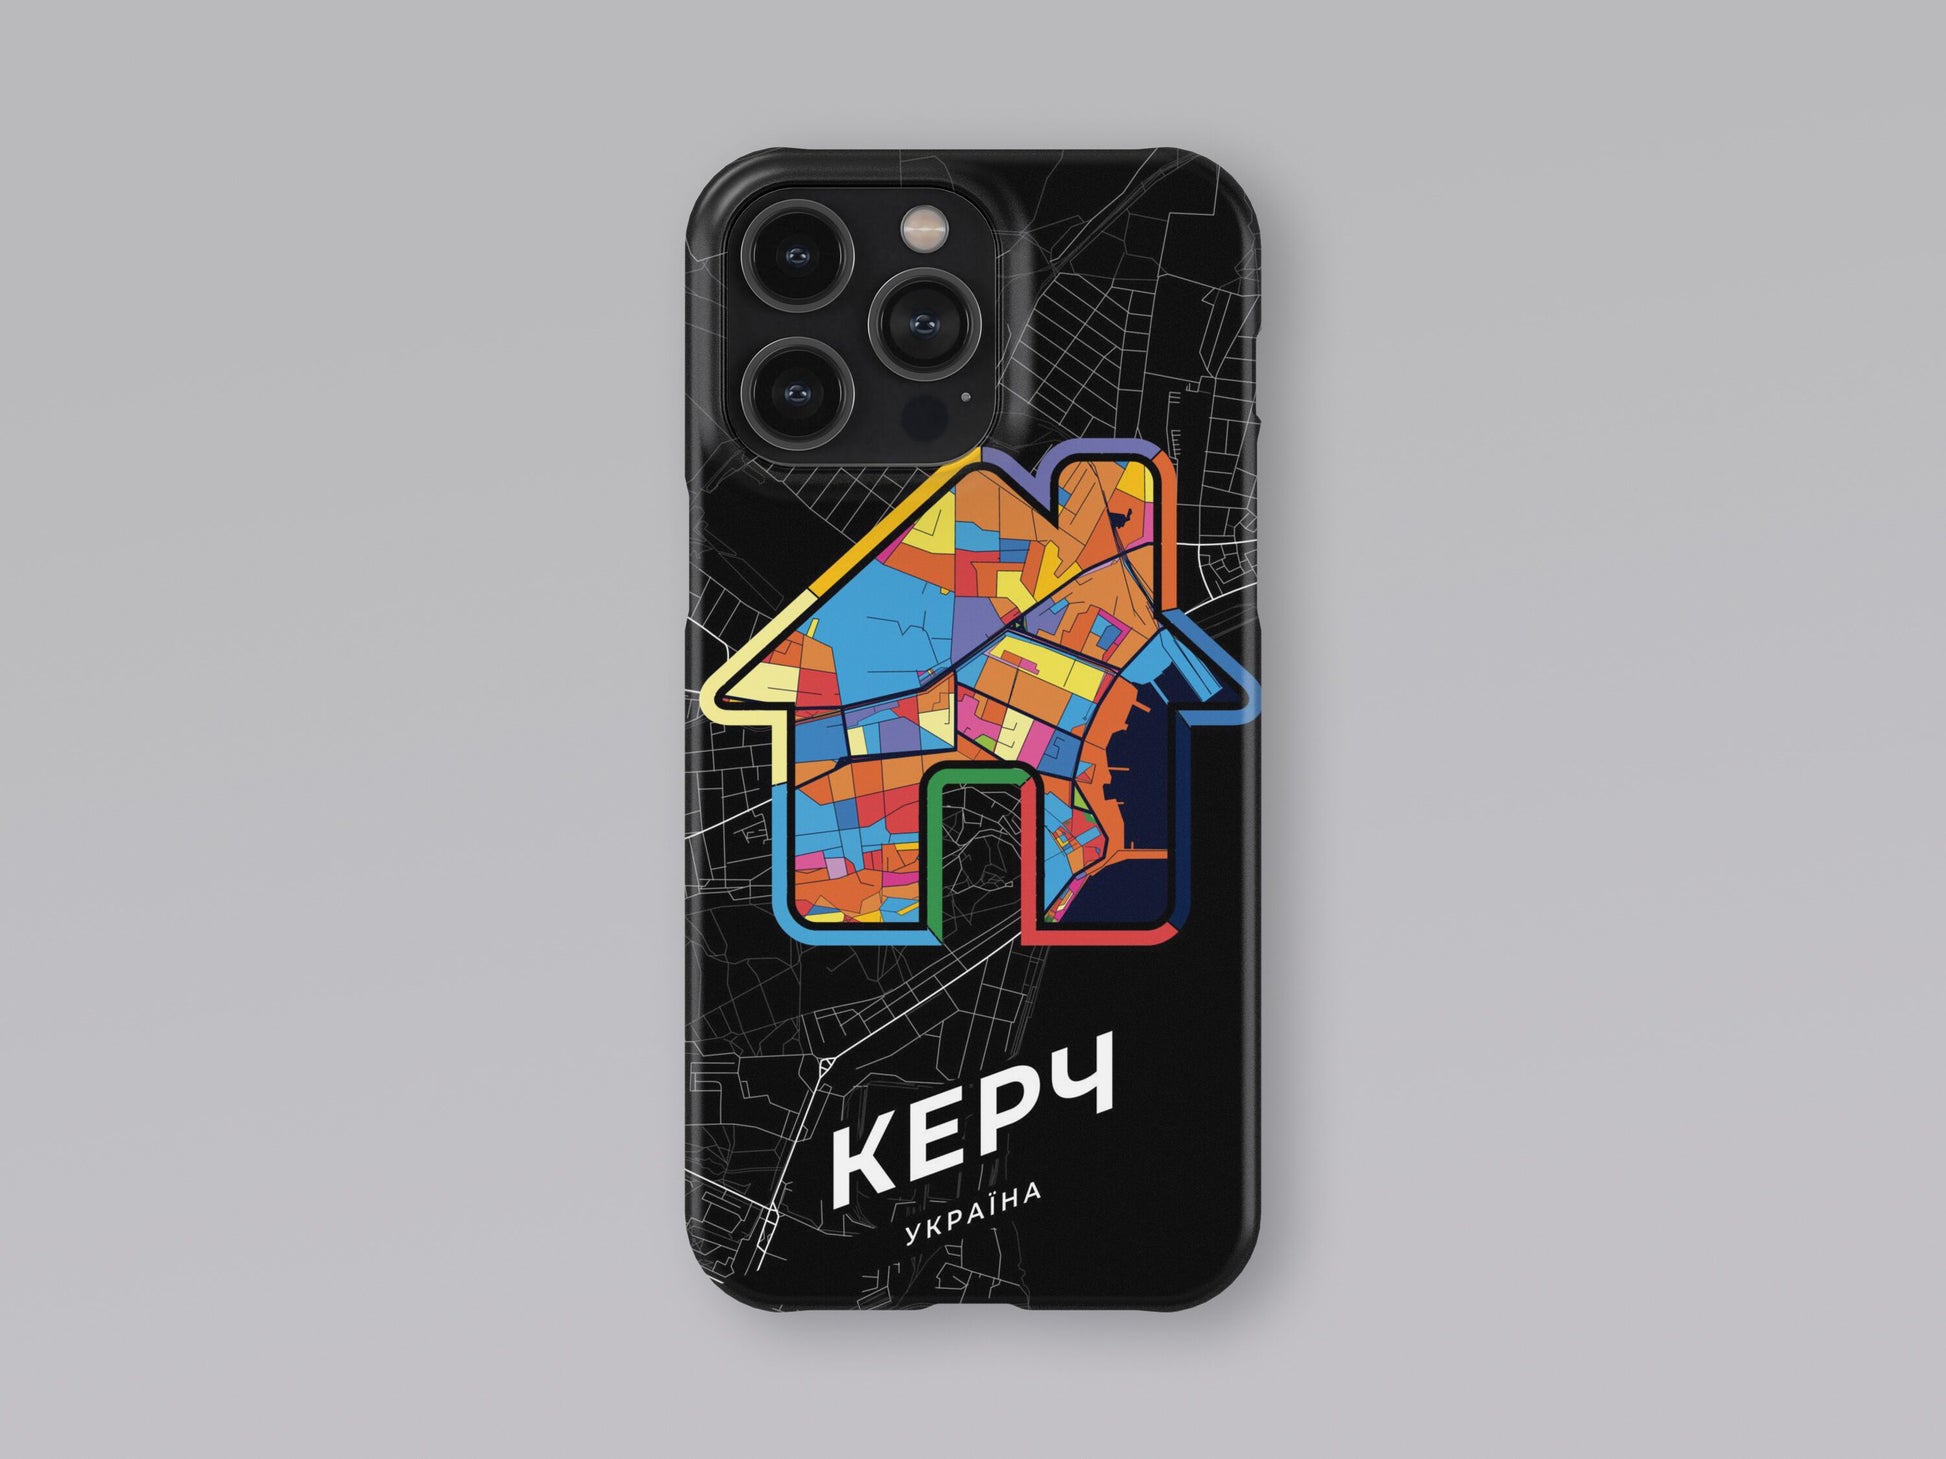 Kerch Ukraine slim phone case with colorful icon. Birthday, wedding or housewarming gift. Couple match cases. 3